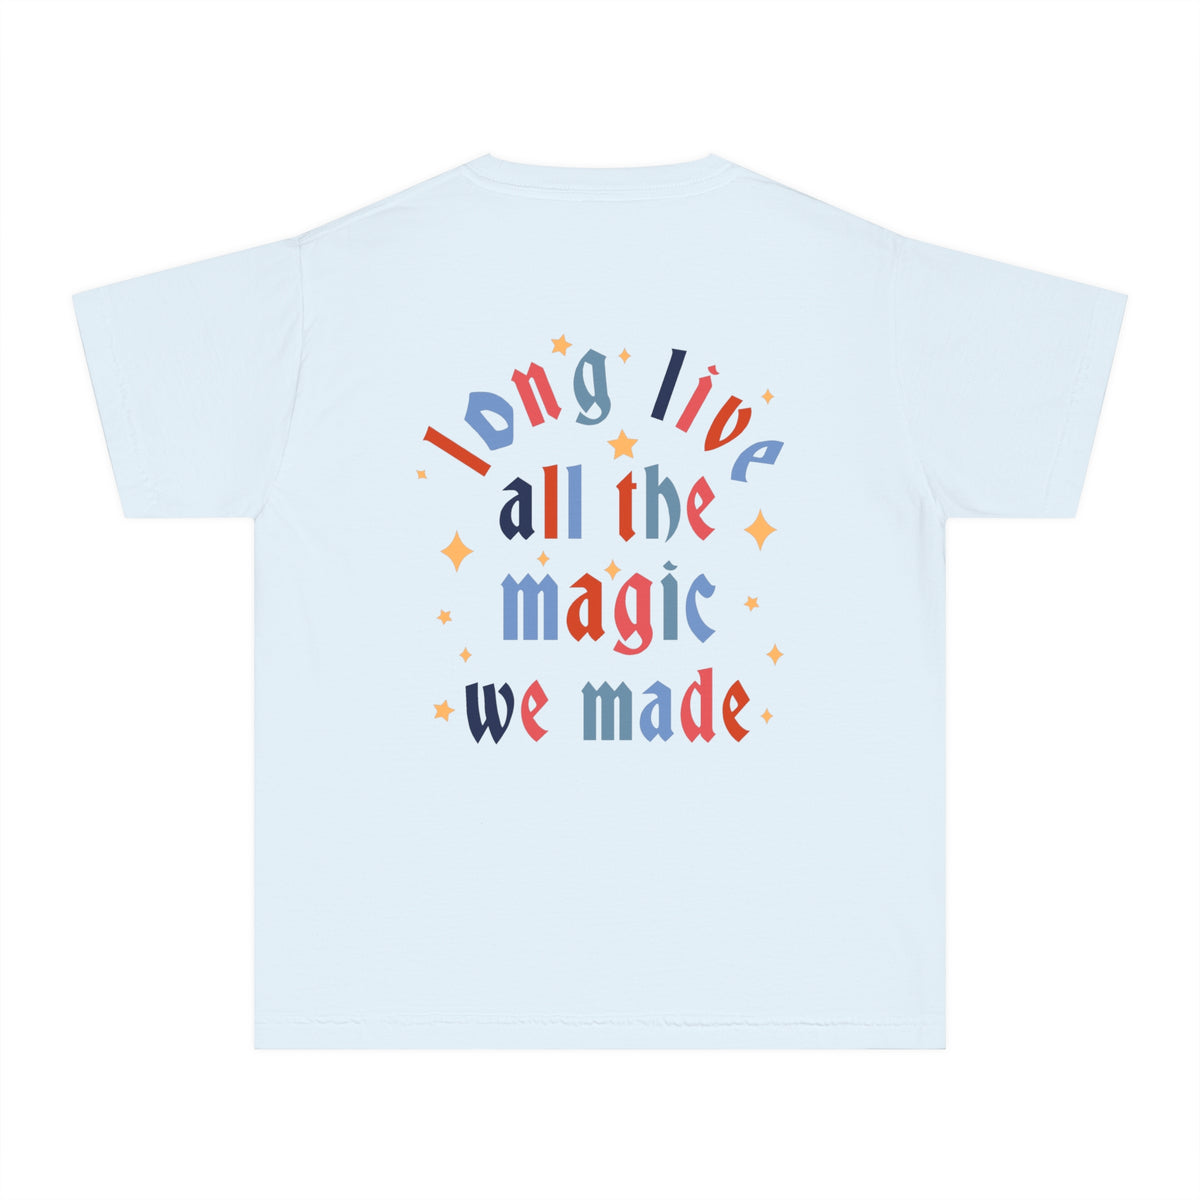 Long Live All The Magic We Made Patriotic Comfort Colors Youth Midweight Tee